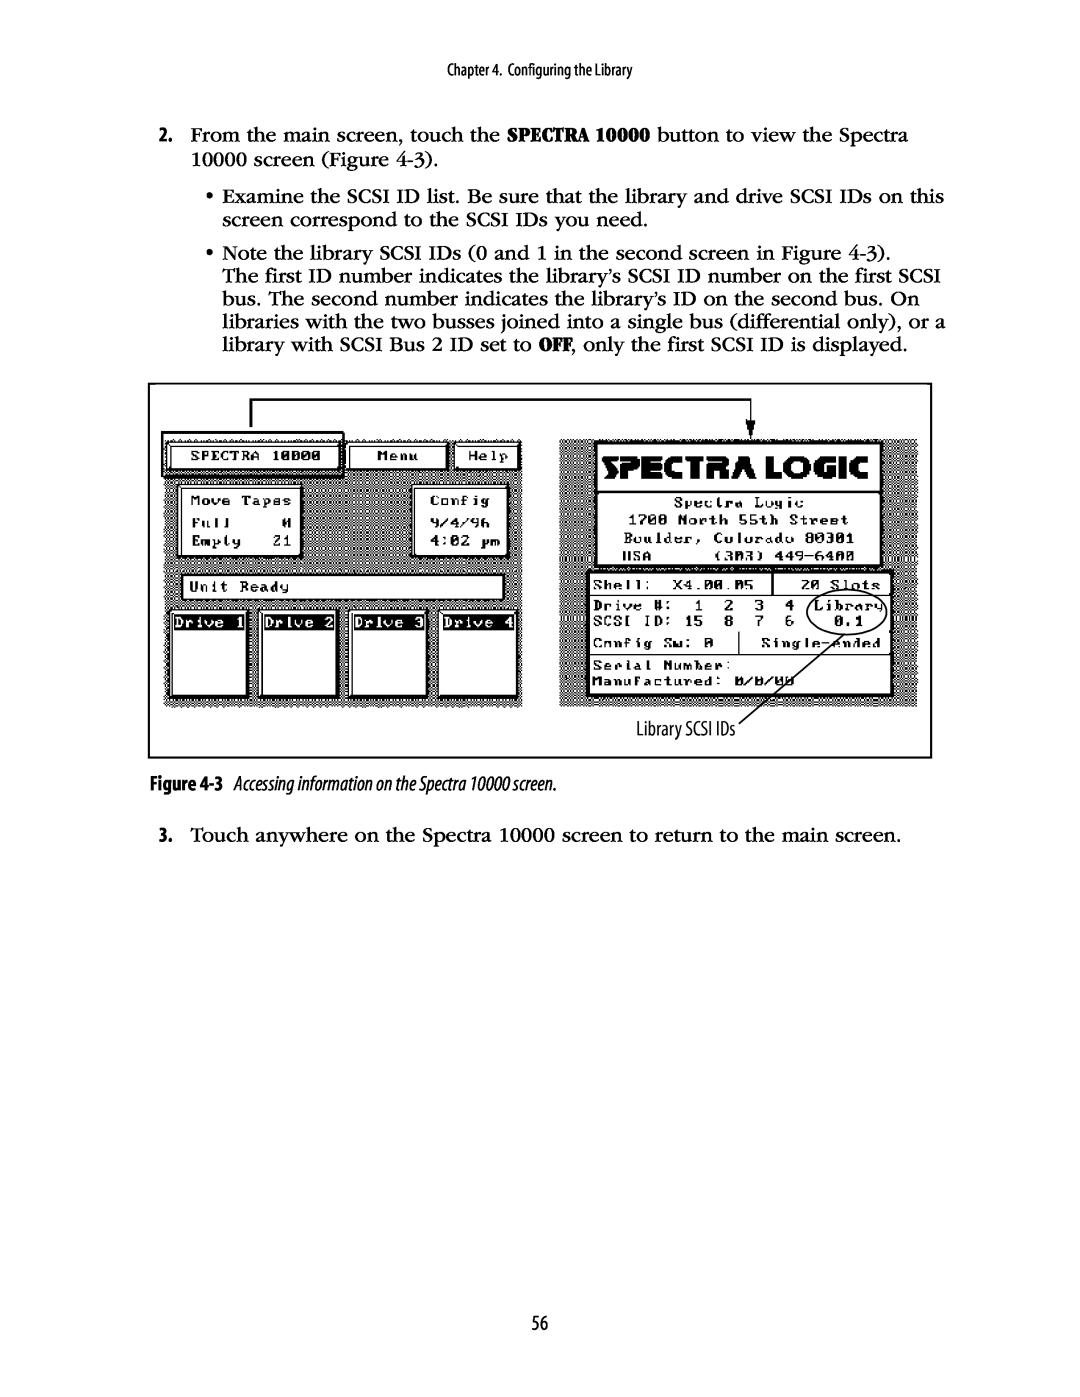 Spectra Logic manual 3 Accessing information on the Spectra 10000 screen 